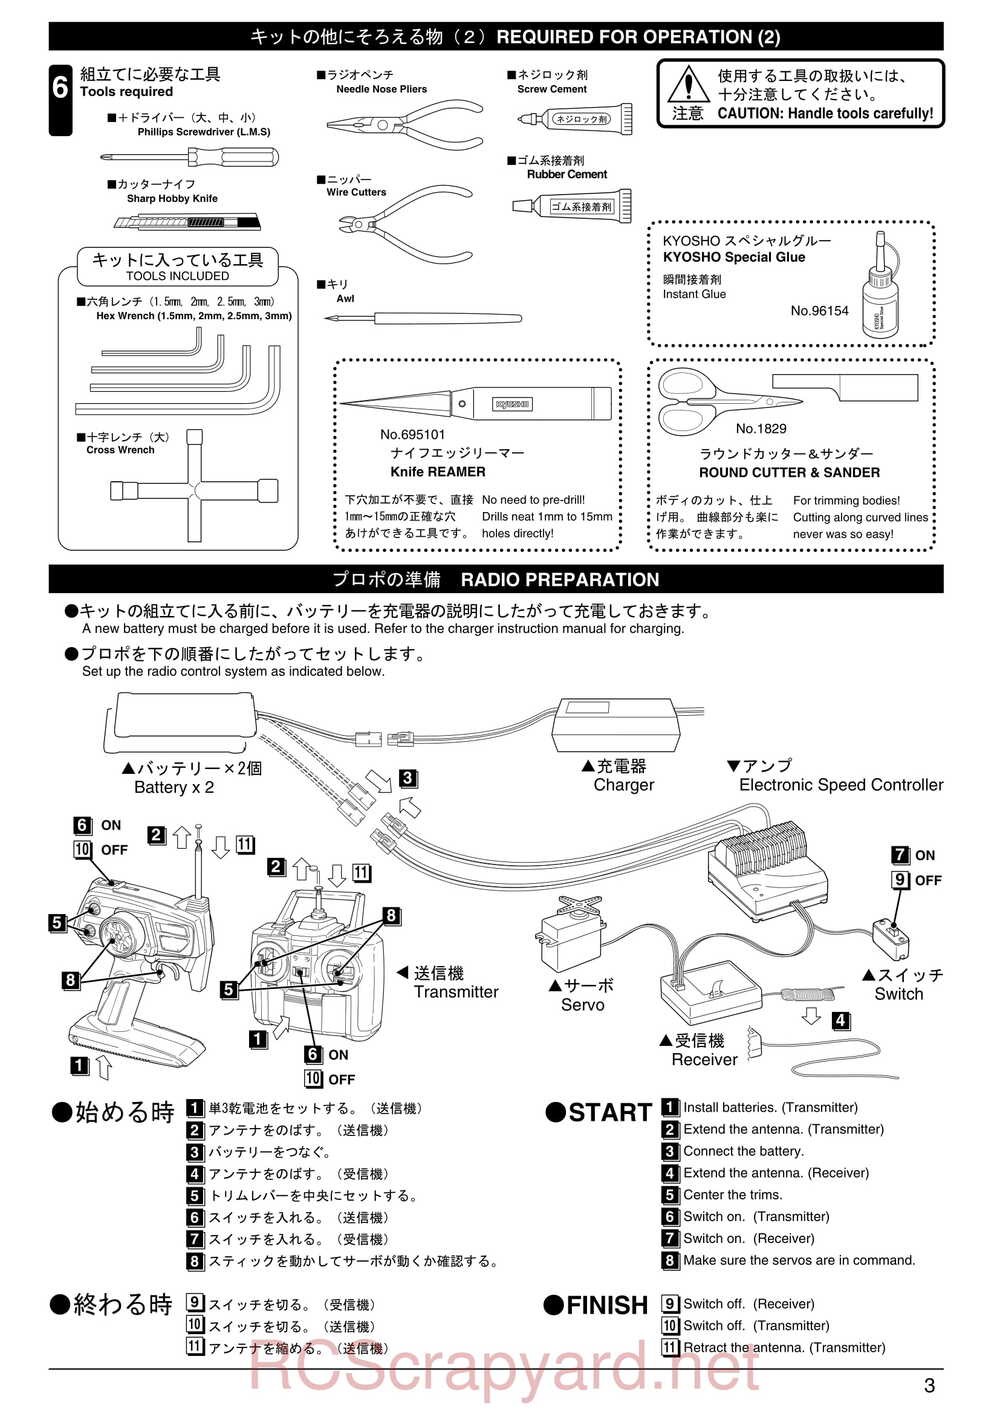 Kyosho - 30522b - Twin-Forcec-SP - Manual - Page 03